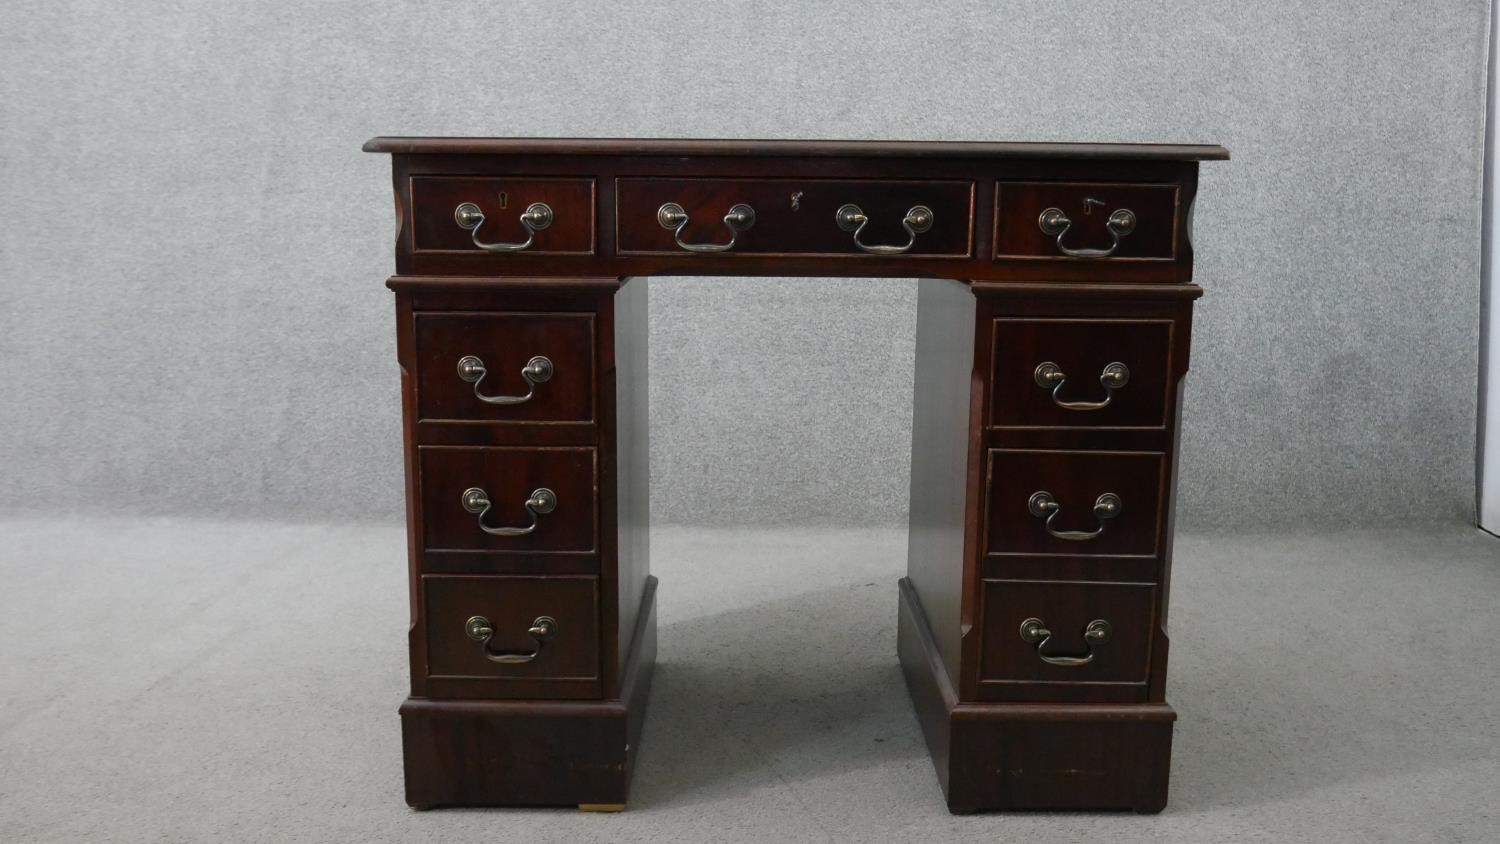 A 19th century style mahogany pedestal desk, of small proportions, with a tooled green leather